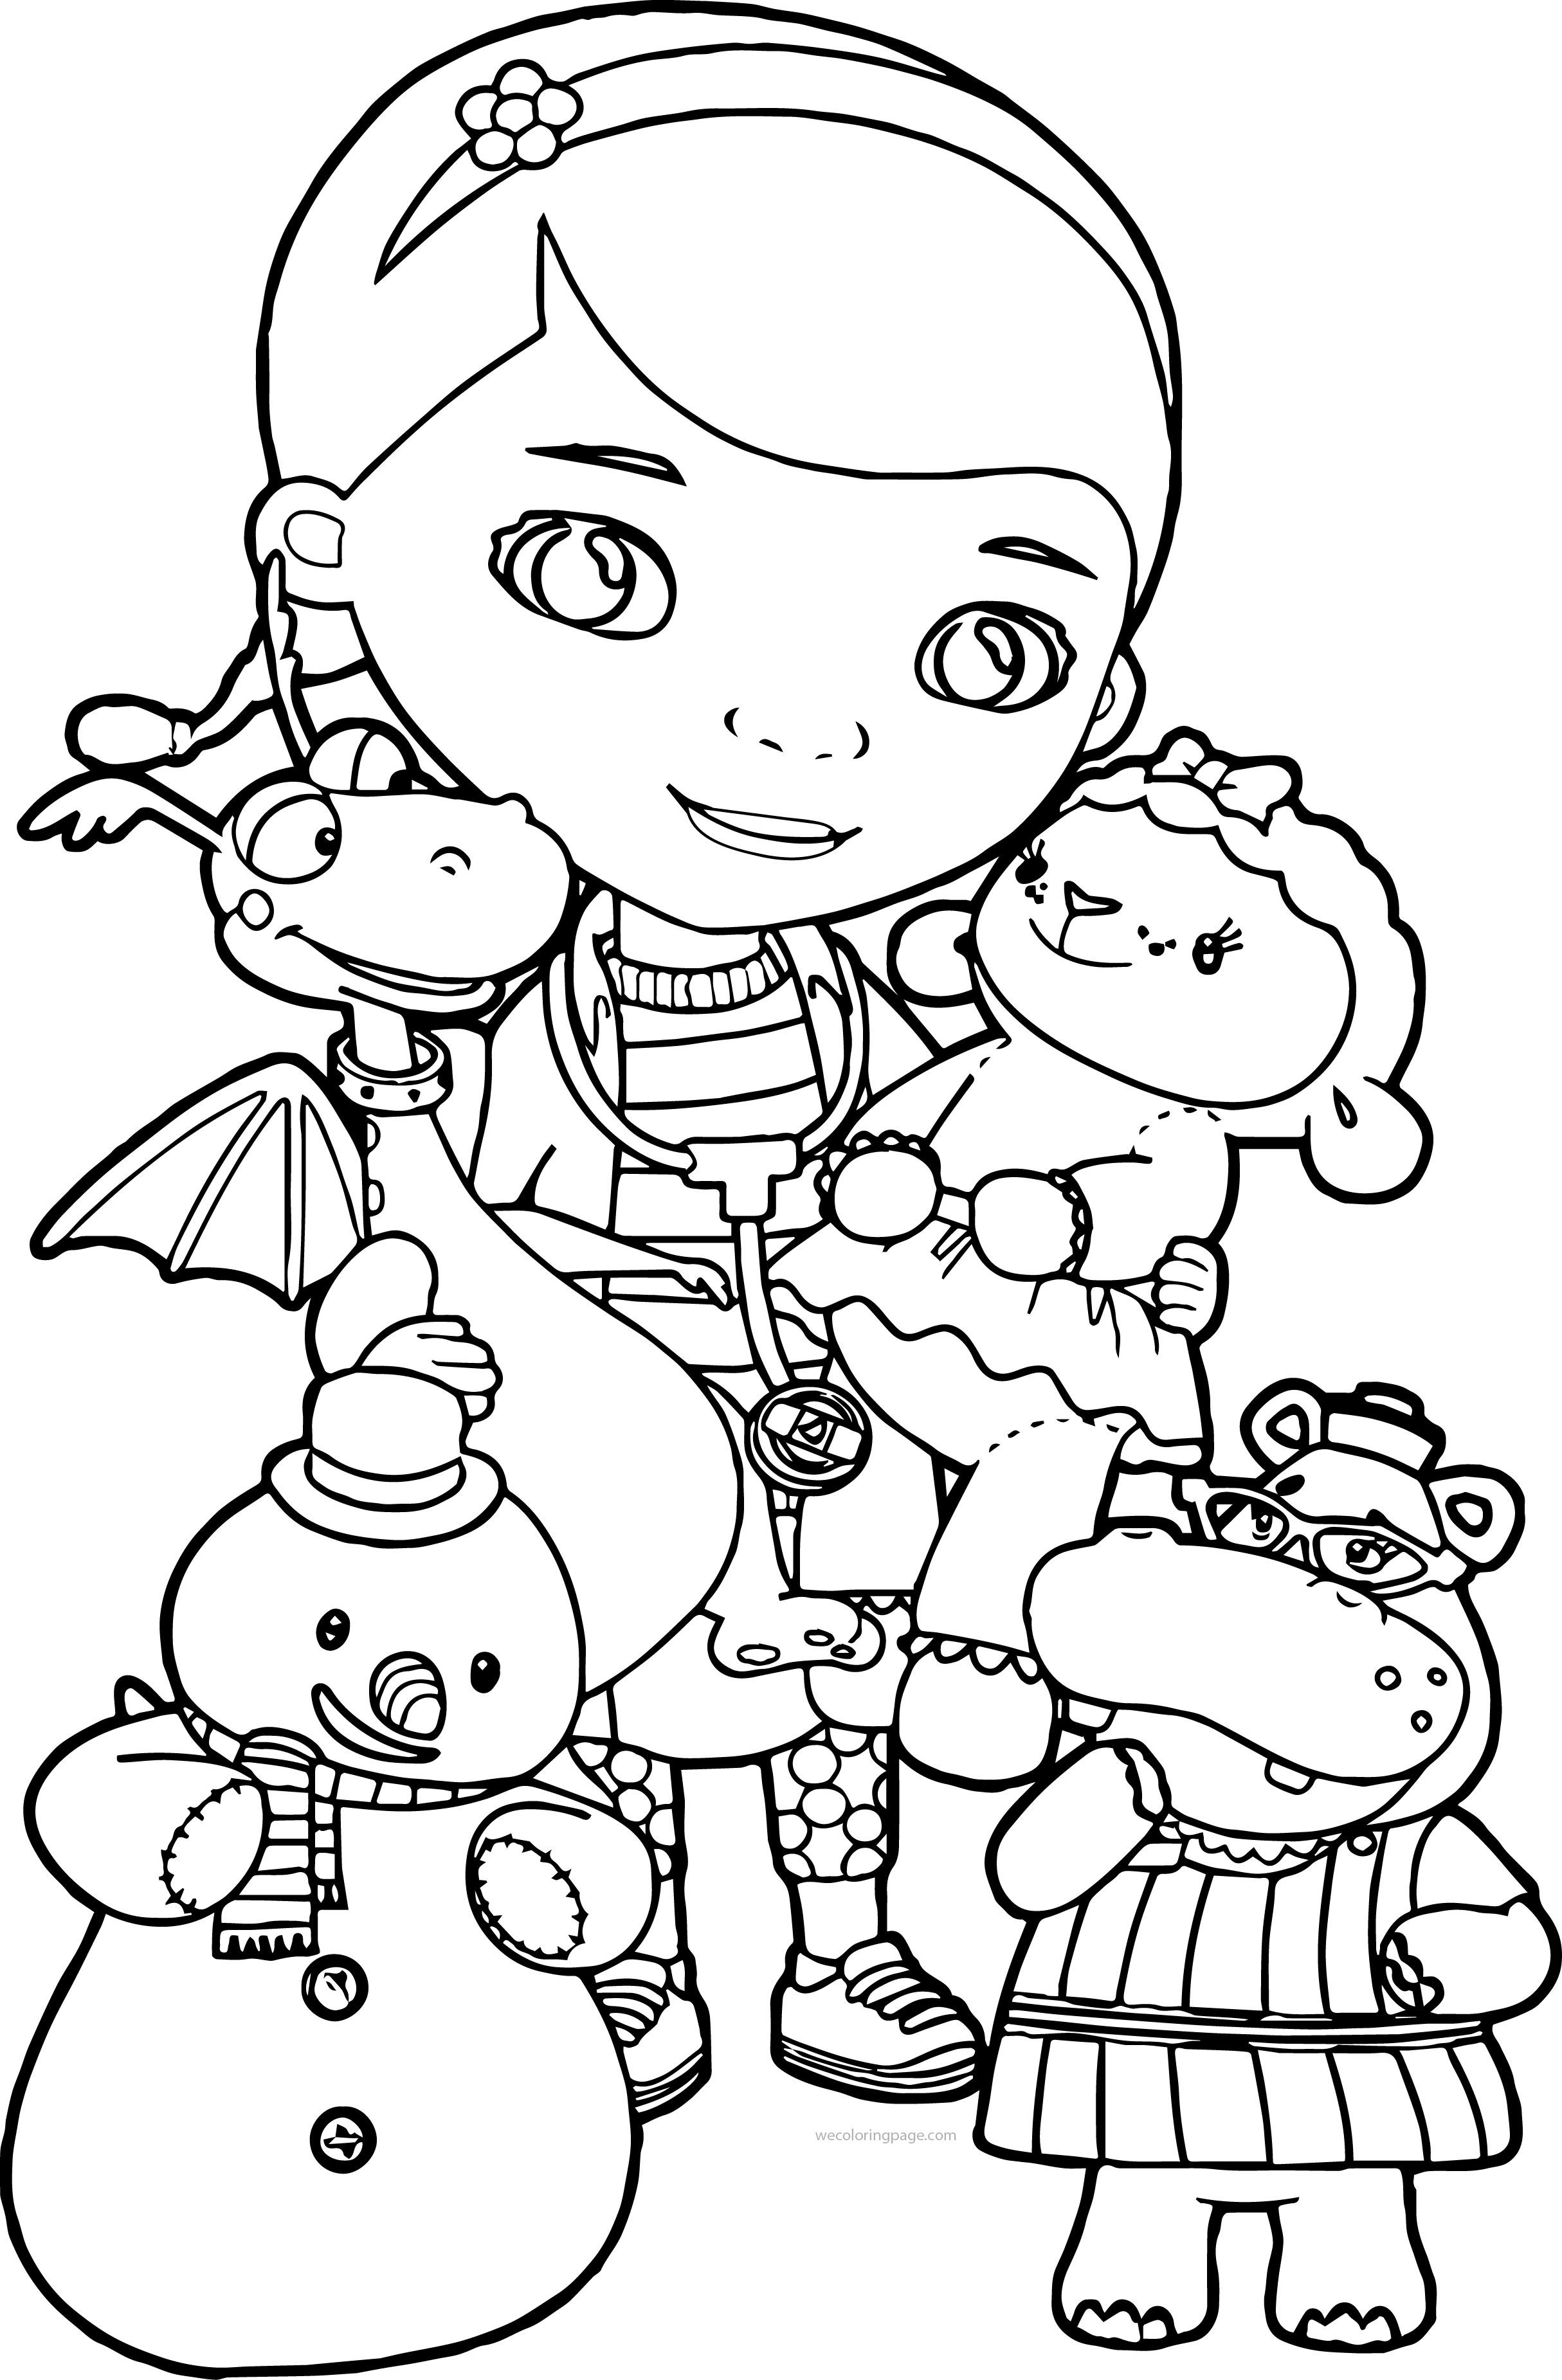 Doc Mcstuffins Coloring Pages at GetDrawings | Free download